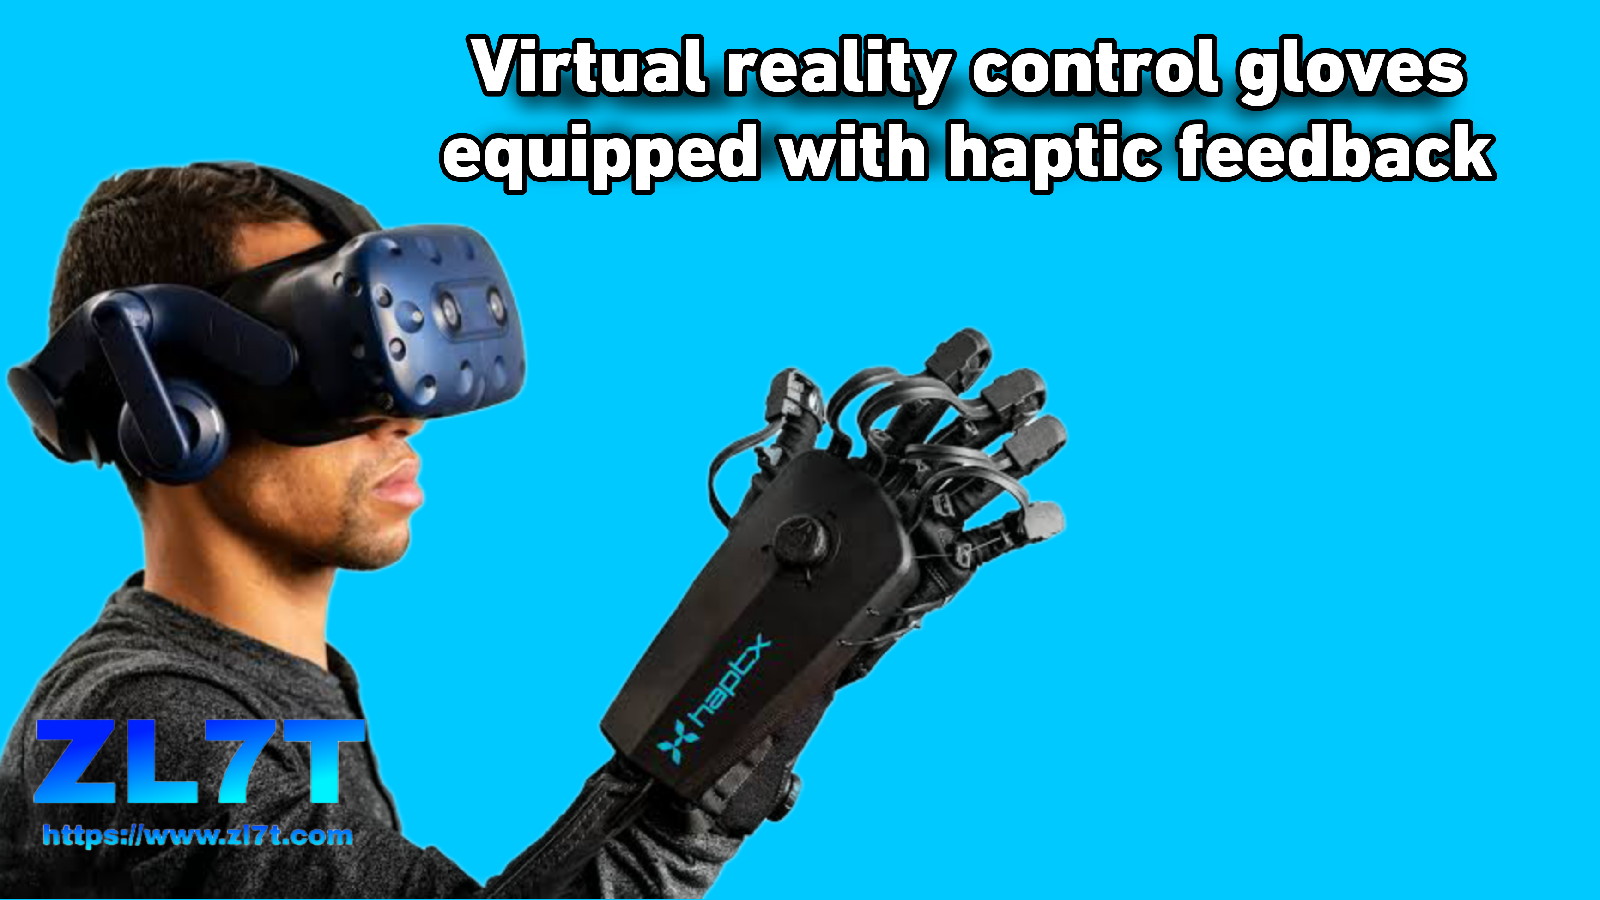 Virtual reality control gloves equipped with haptic feedback